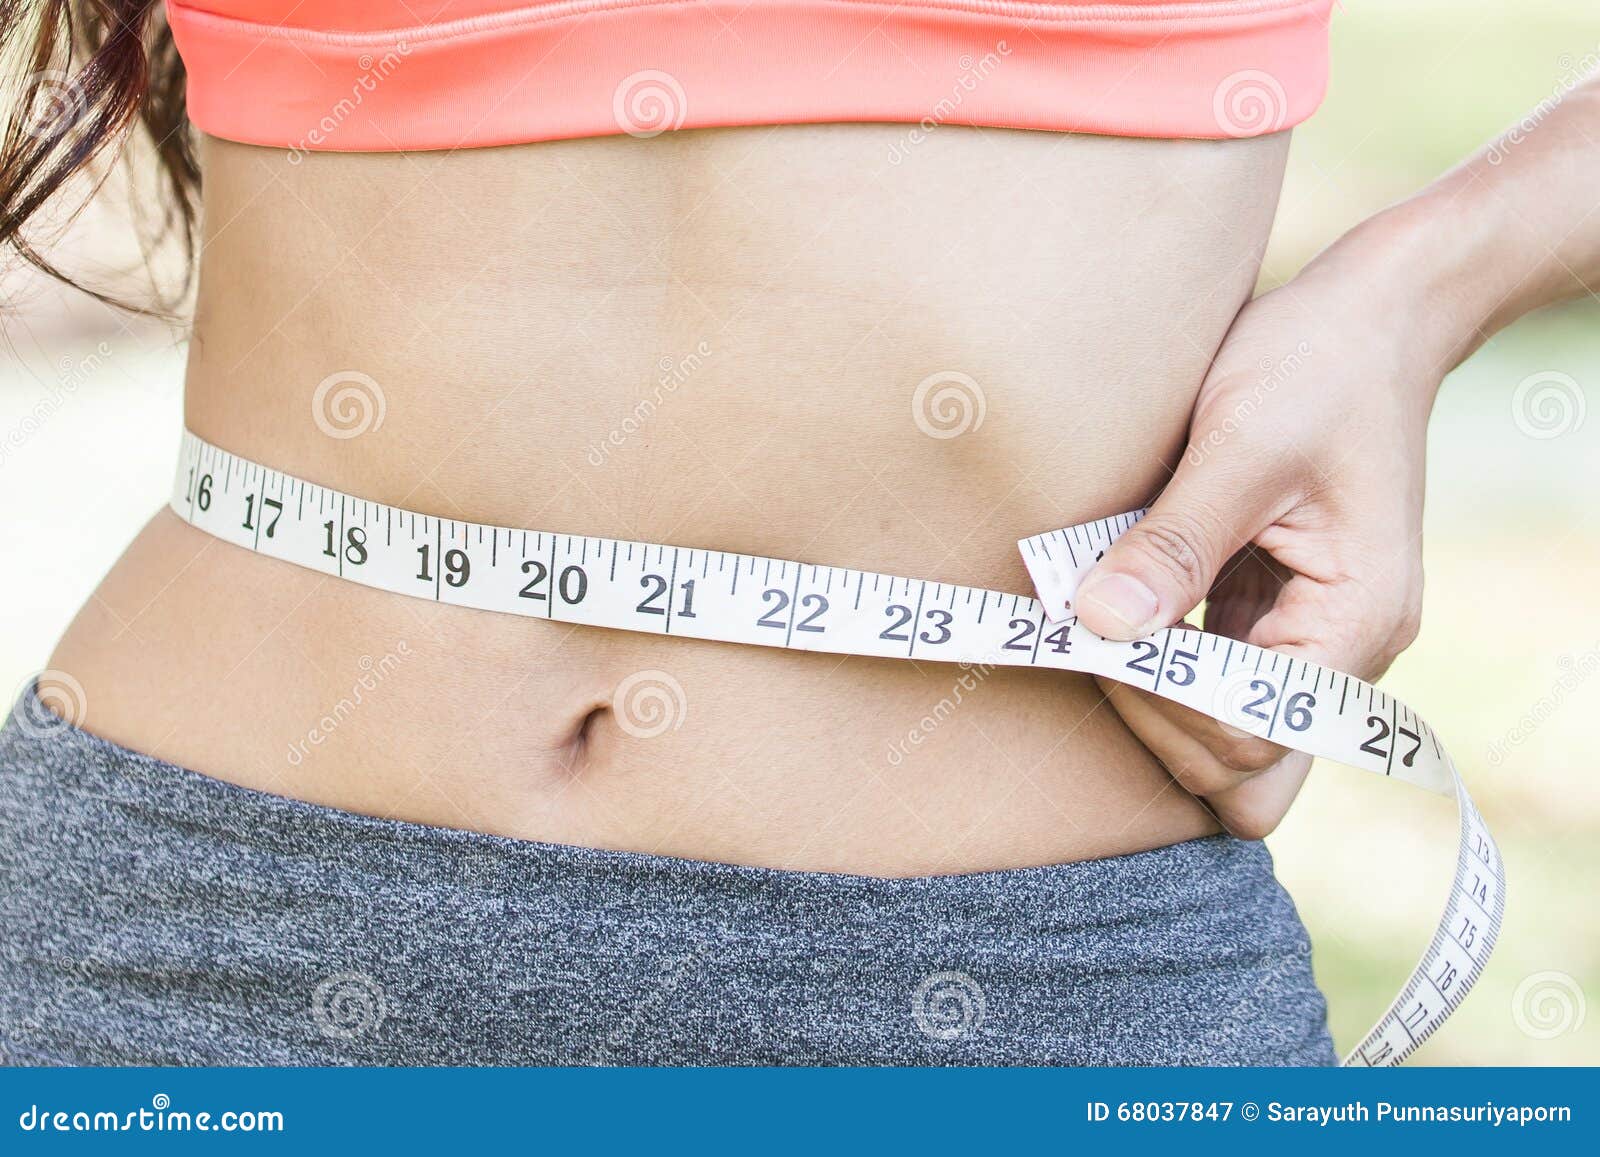 Woman Measuring Her Bra Size with Tape Measure Stock Image - Image of  attractive, tape: 66398121